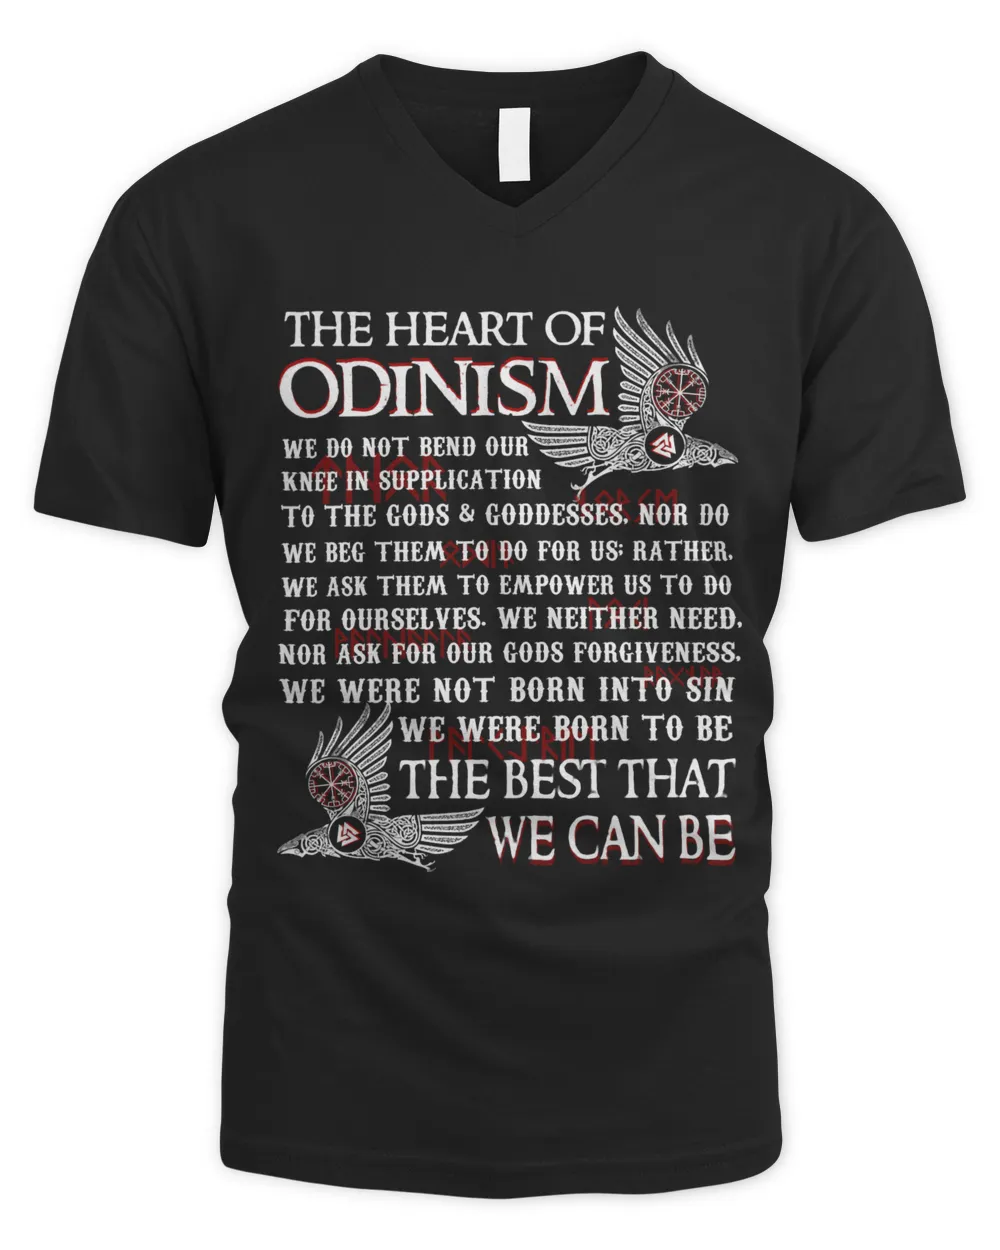 Viking T Shirt For men - The heart Of Odinism